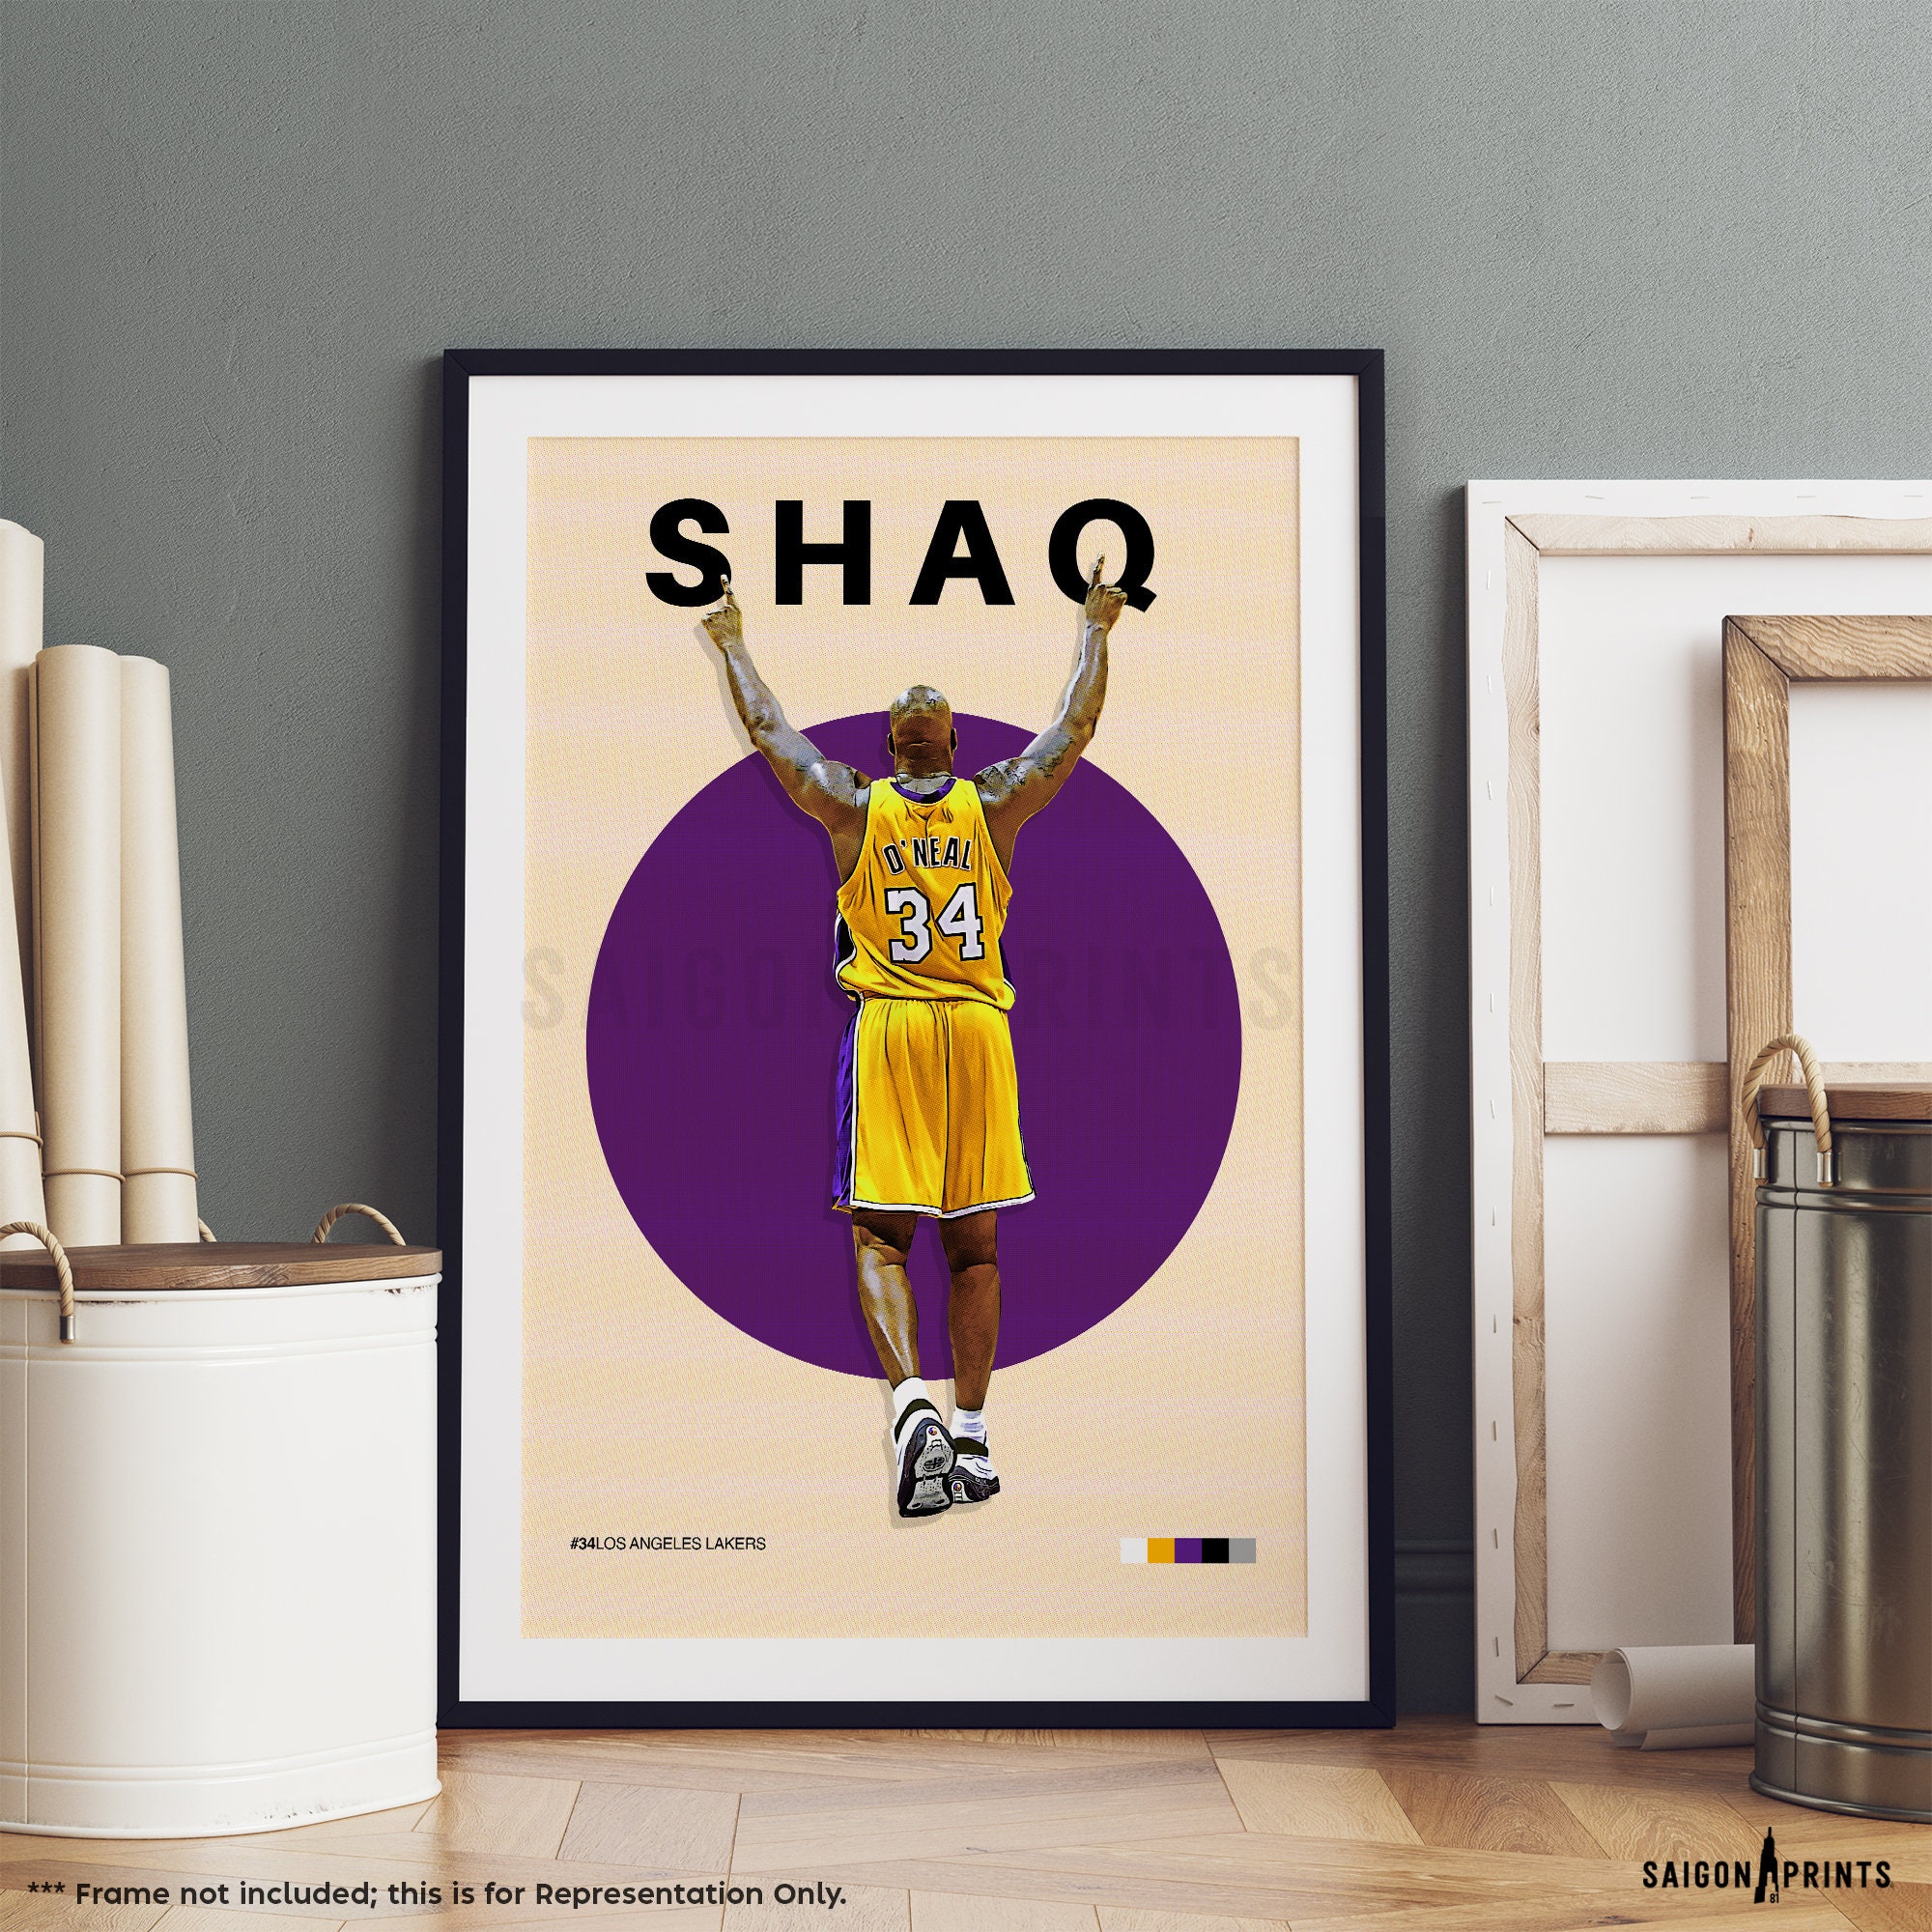  Jermaine O'Neal Poster USA American Basketball Player Dream  Team Star Artworks Canvas Poster Room Aesthetic Wall Art Prints Home Modern  Decor Gifts Framed-unframed 12x12inch(30x30cm): Posters & Prints